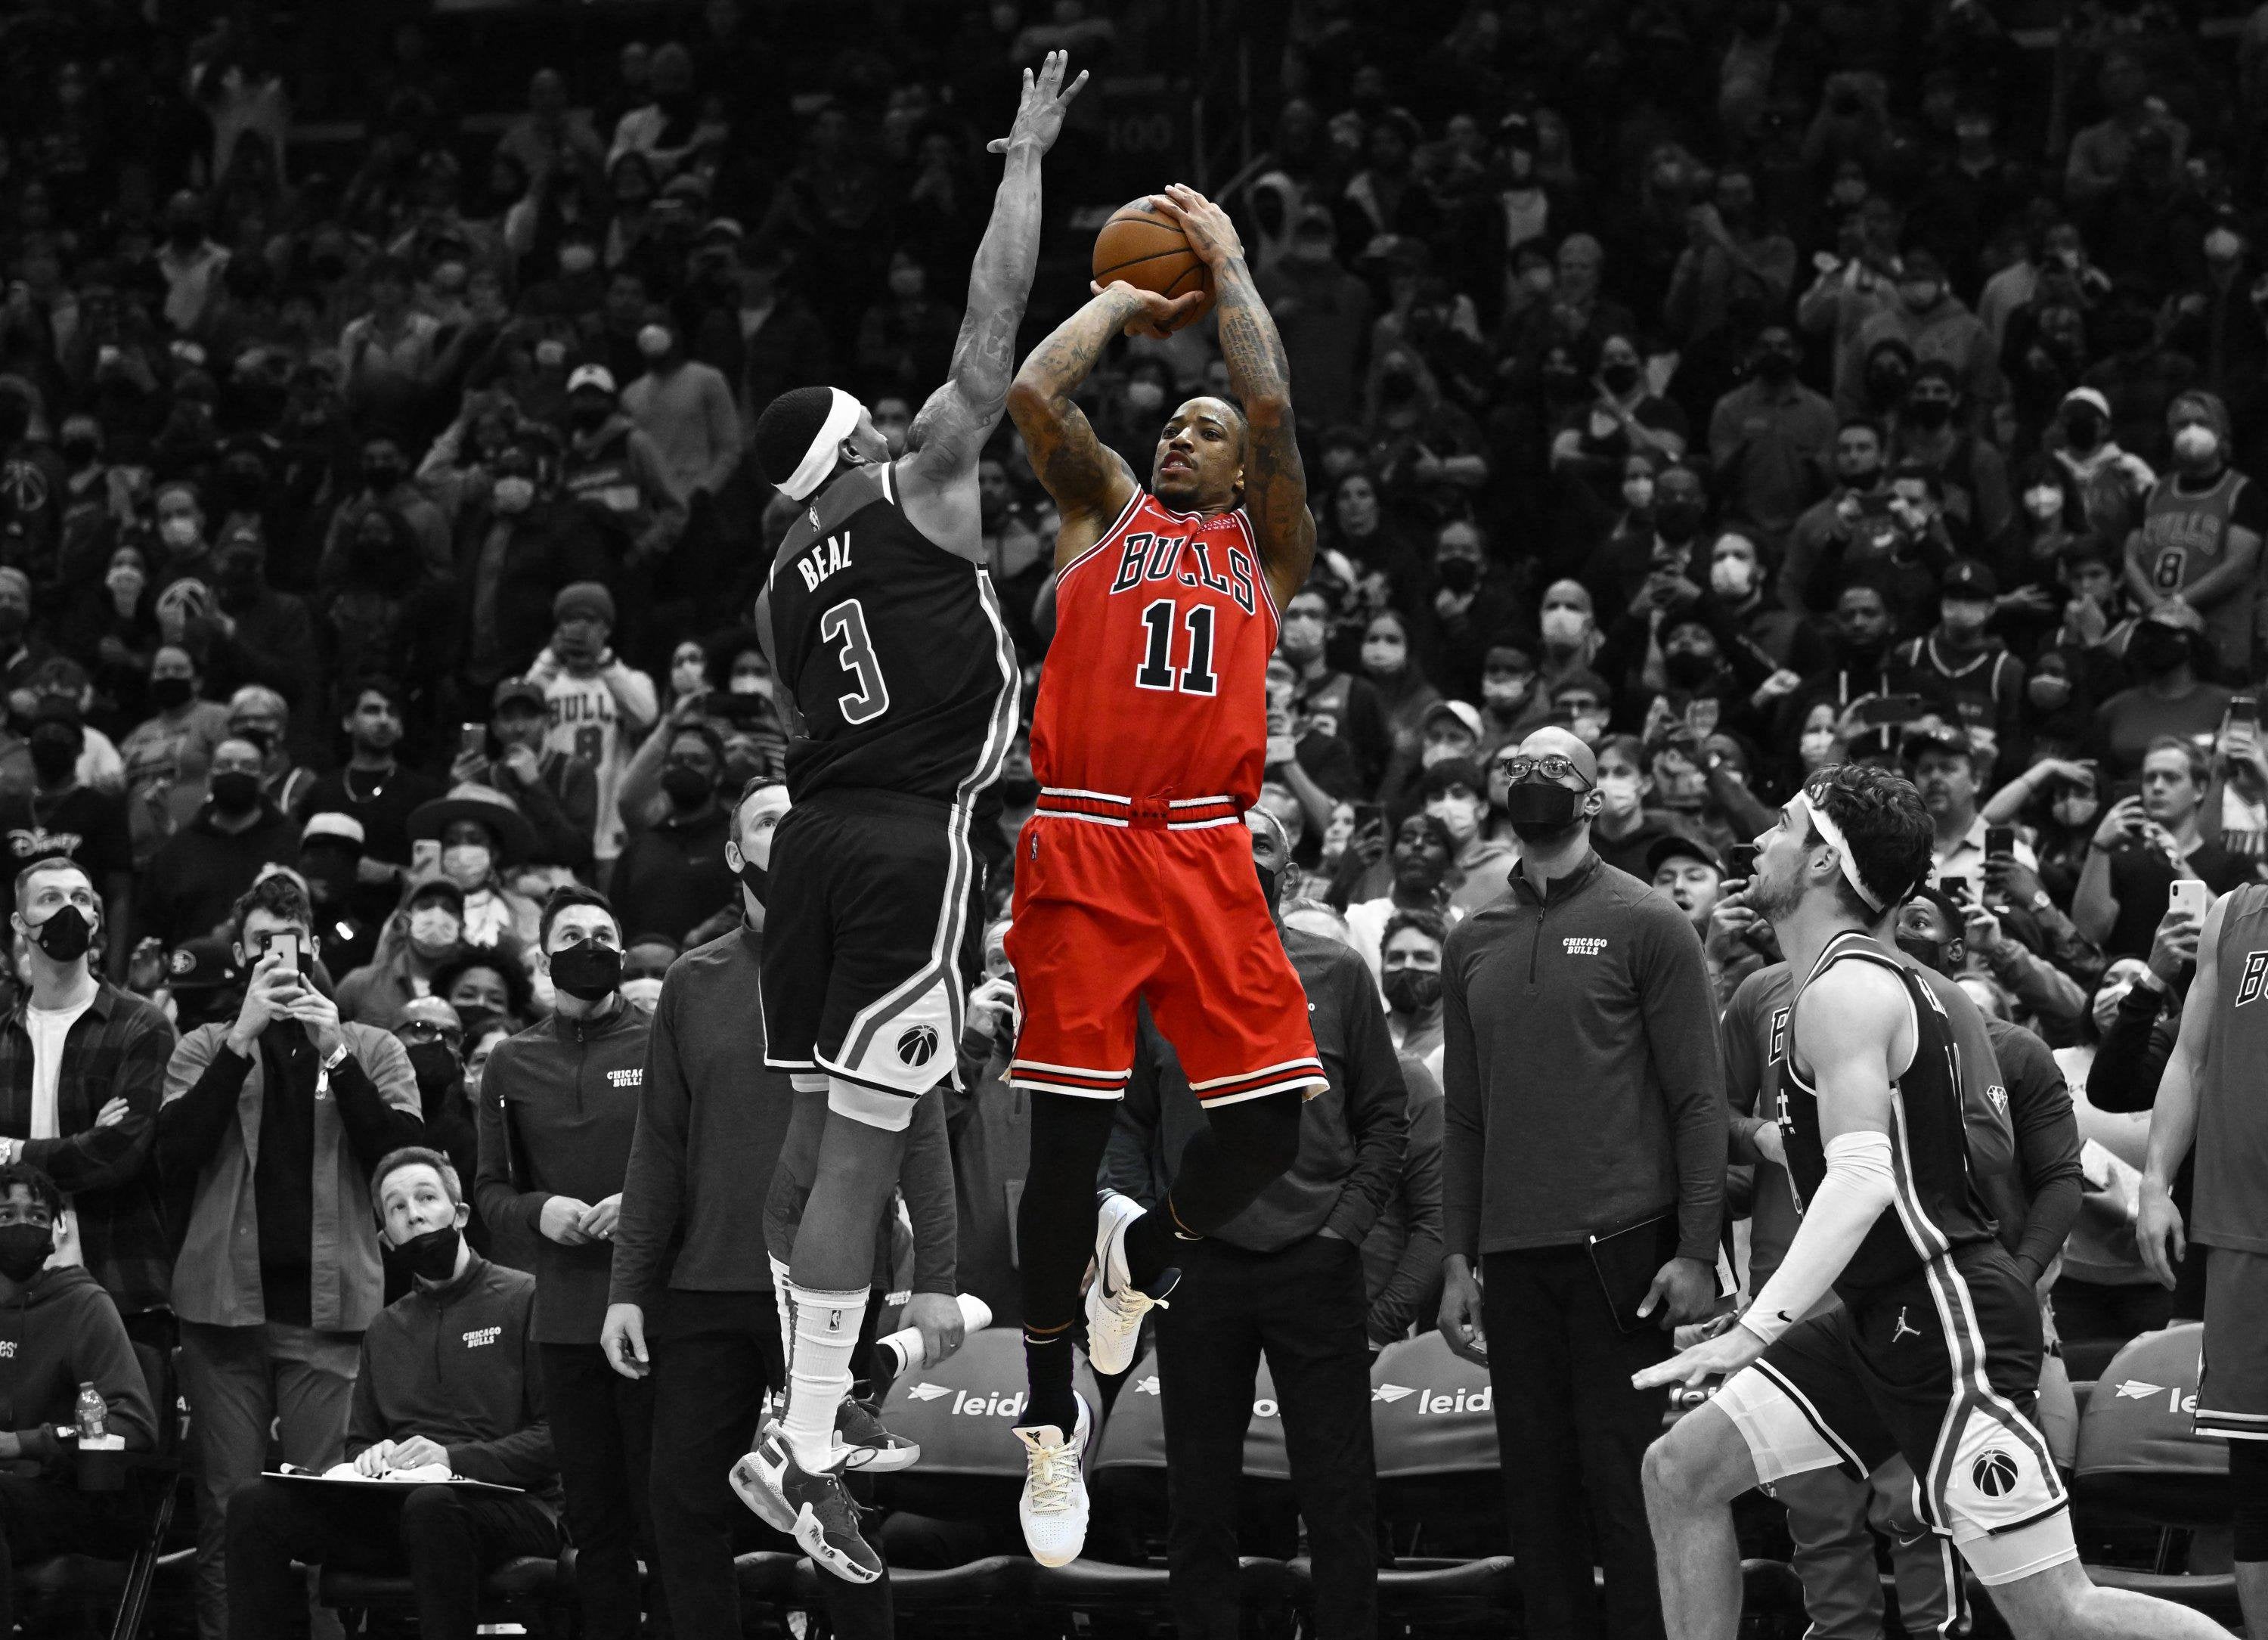 Hastily Made Some Wallpaper Of DeMar DeRozan's Buzzer Beaters For Myself And Thought I'd Share